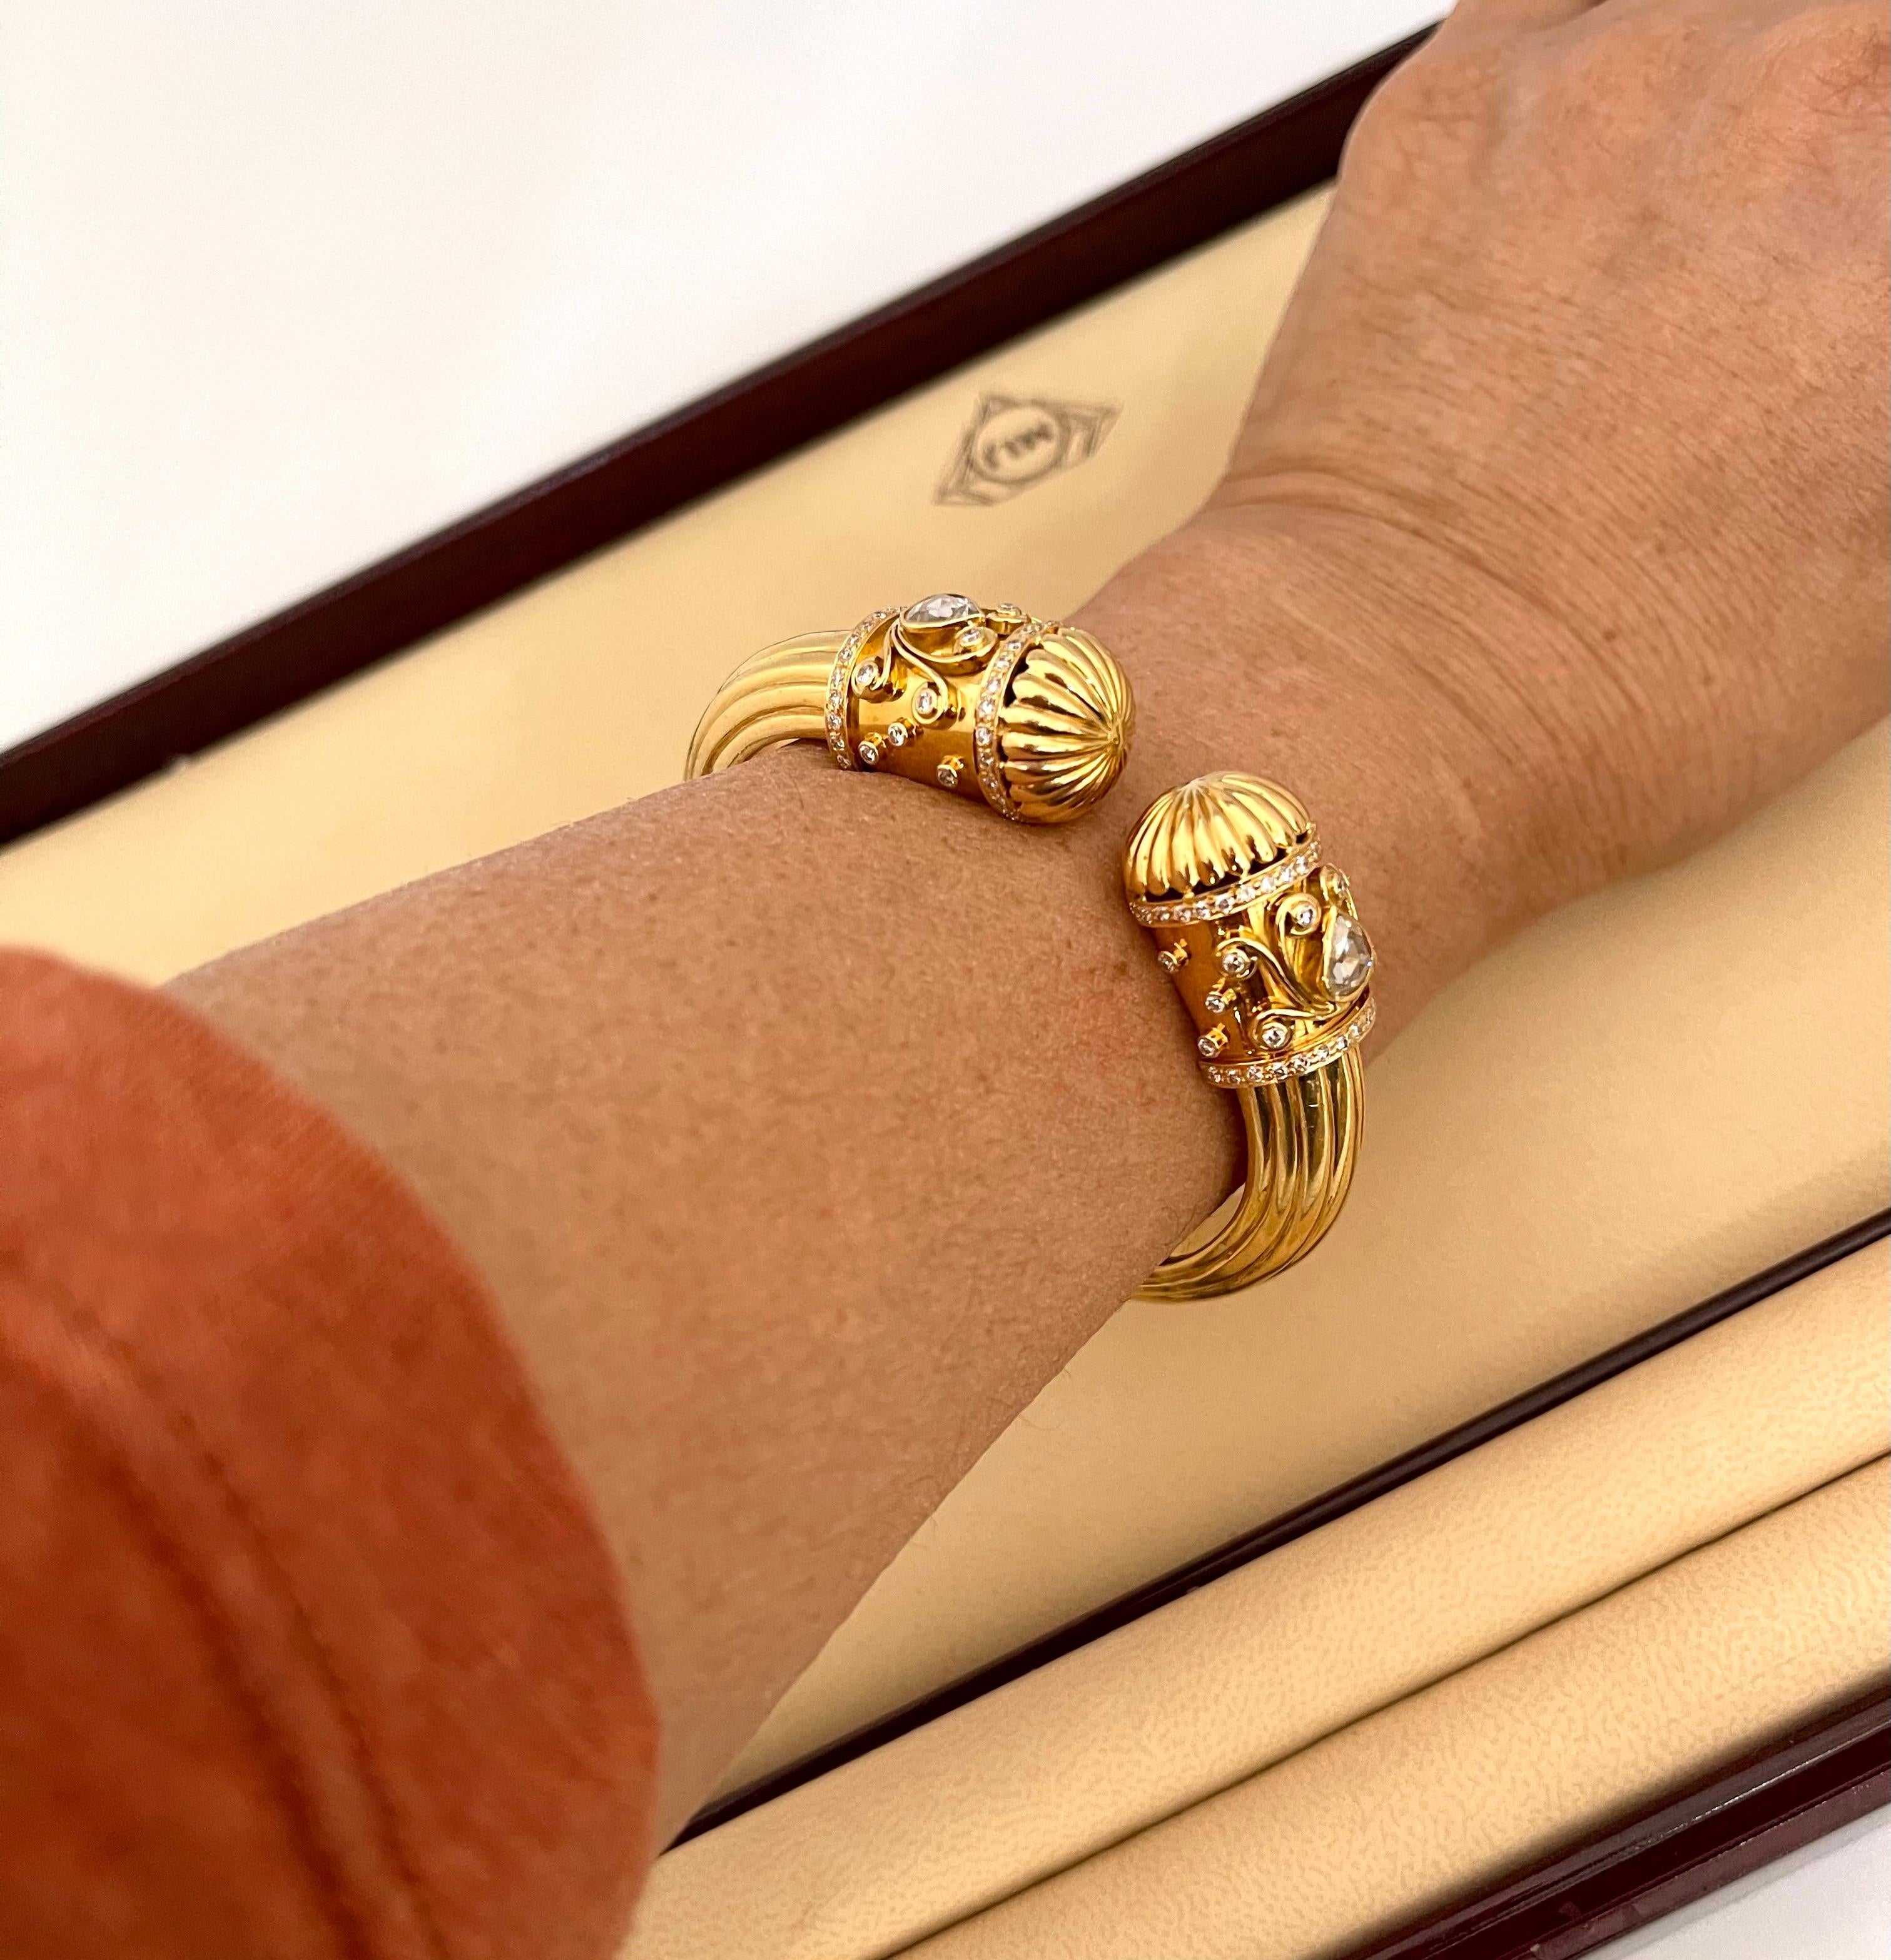 Diamond Cuff  Bangle Bracelet 18 Karat Yellow Gold 59 Gram
It features a bangle crafted from an 18  karat  Yellow gold and embedded with  Diamonds on the ends of the bangle. .
Open from one side for easy access to wear it. 
Round brilliant cut